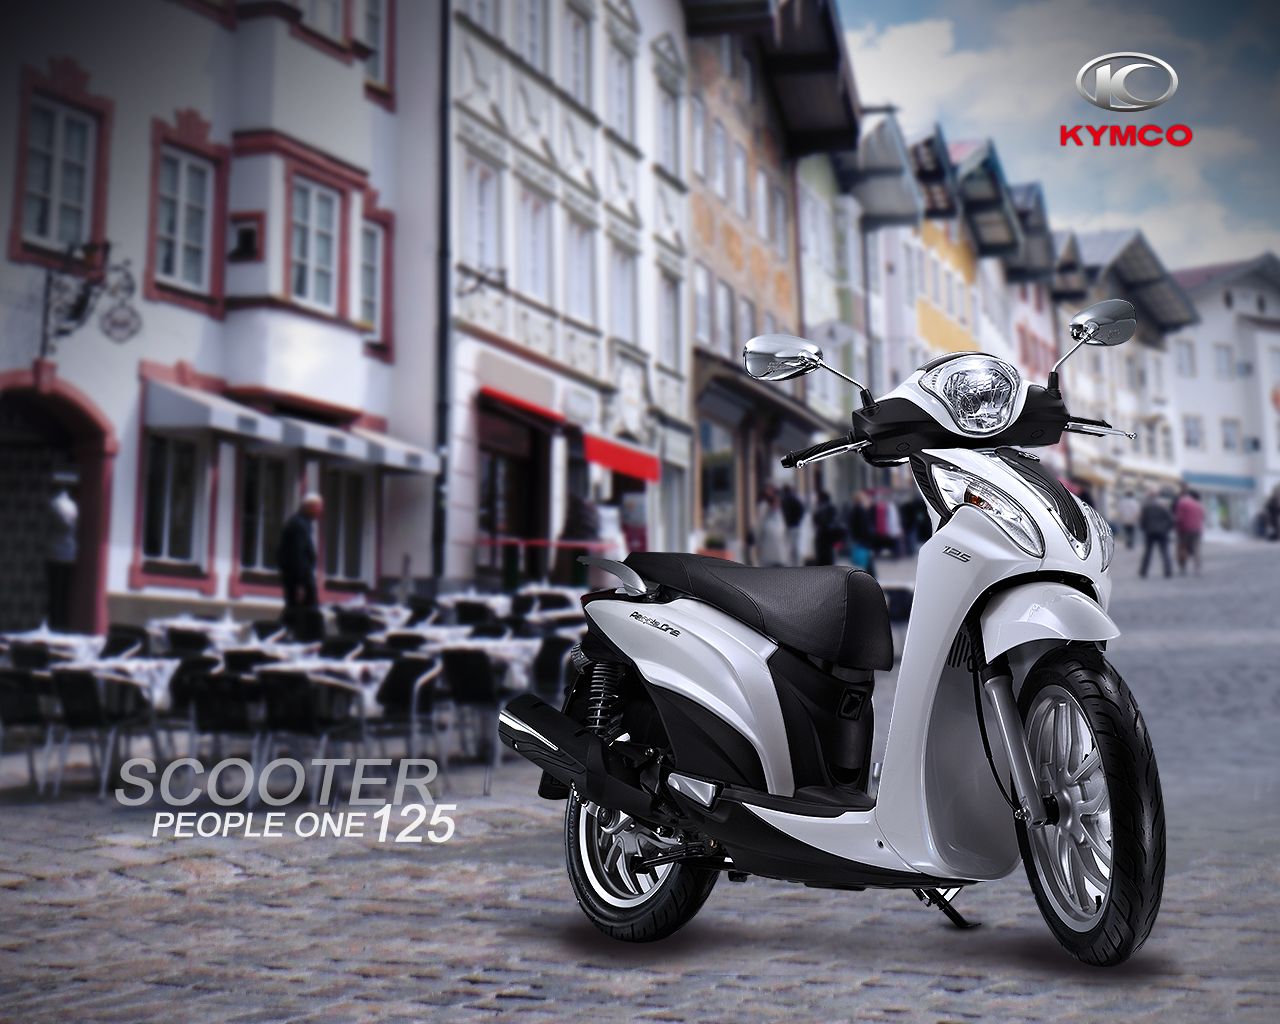 2014 Kymco People One